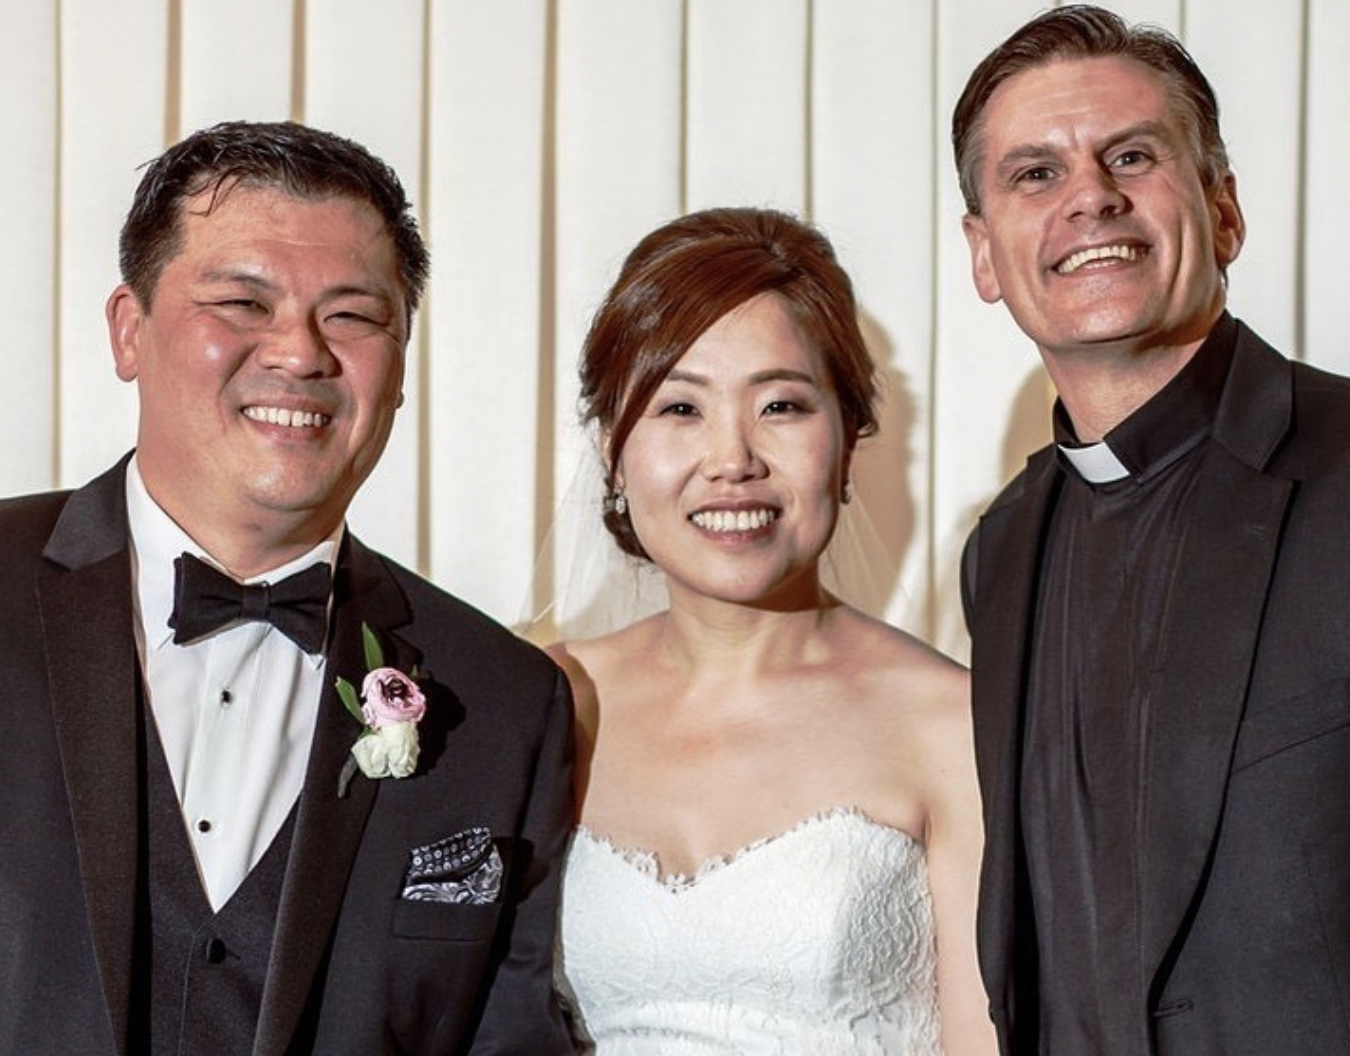 Bride, groom, and wedding officiant smile for portrait after wedding ceremony